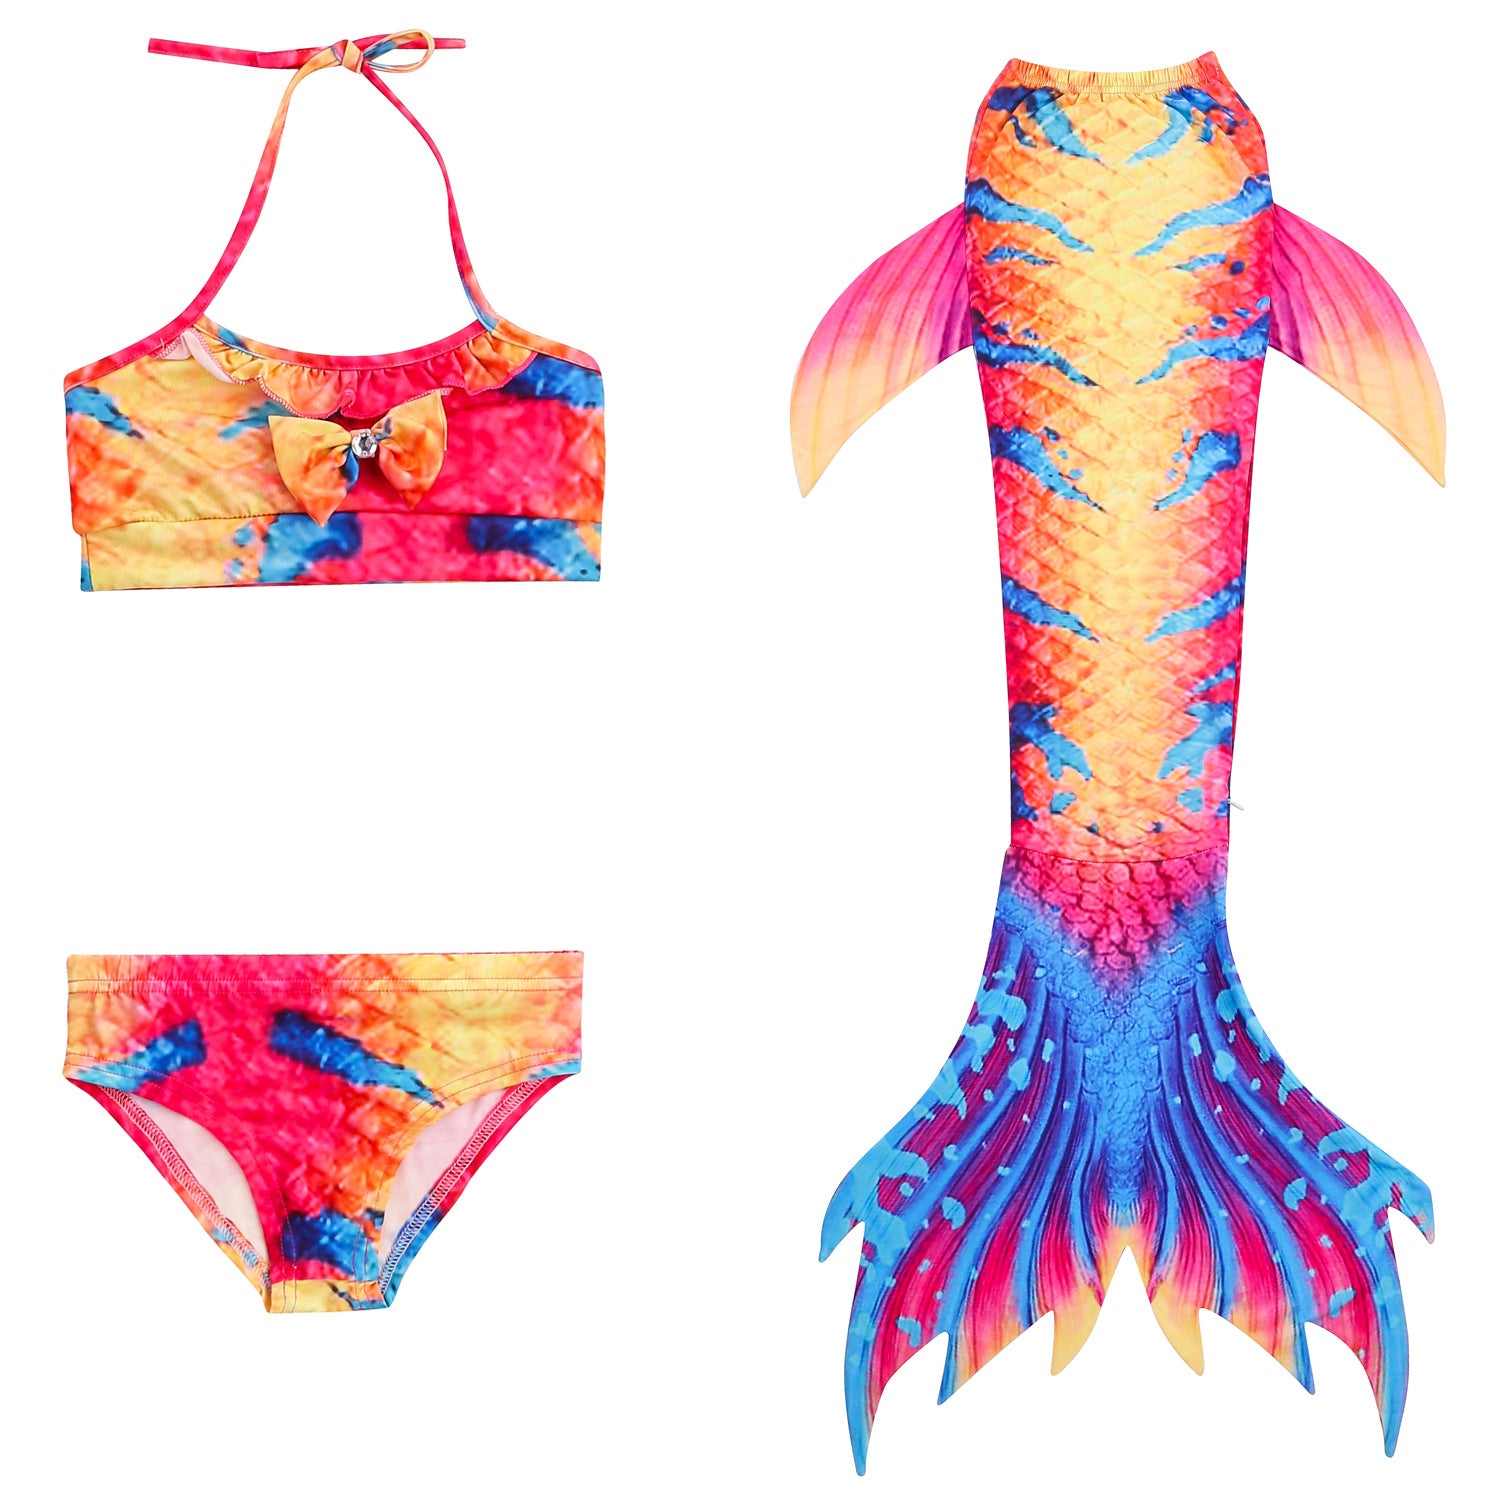 Adorable Orange, Yellow & Blue Mermaid Tail with added dorsal fins with matching material halter-neck bikini with cute embellished bow. Part of our luxury range, this tail has a high quality side zip. Mini Mermaid Tails